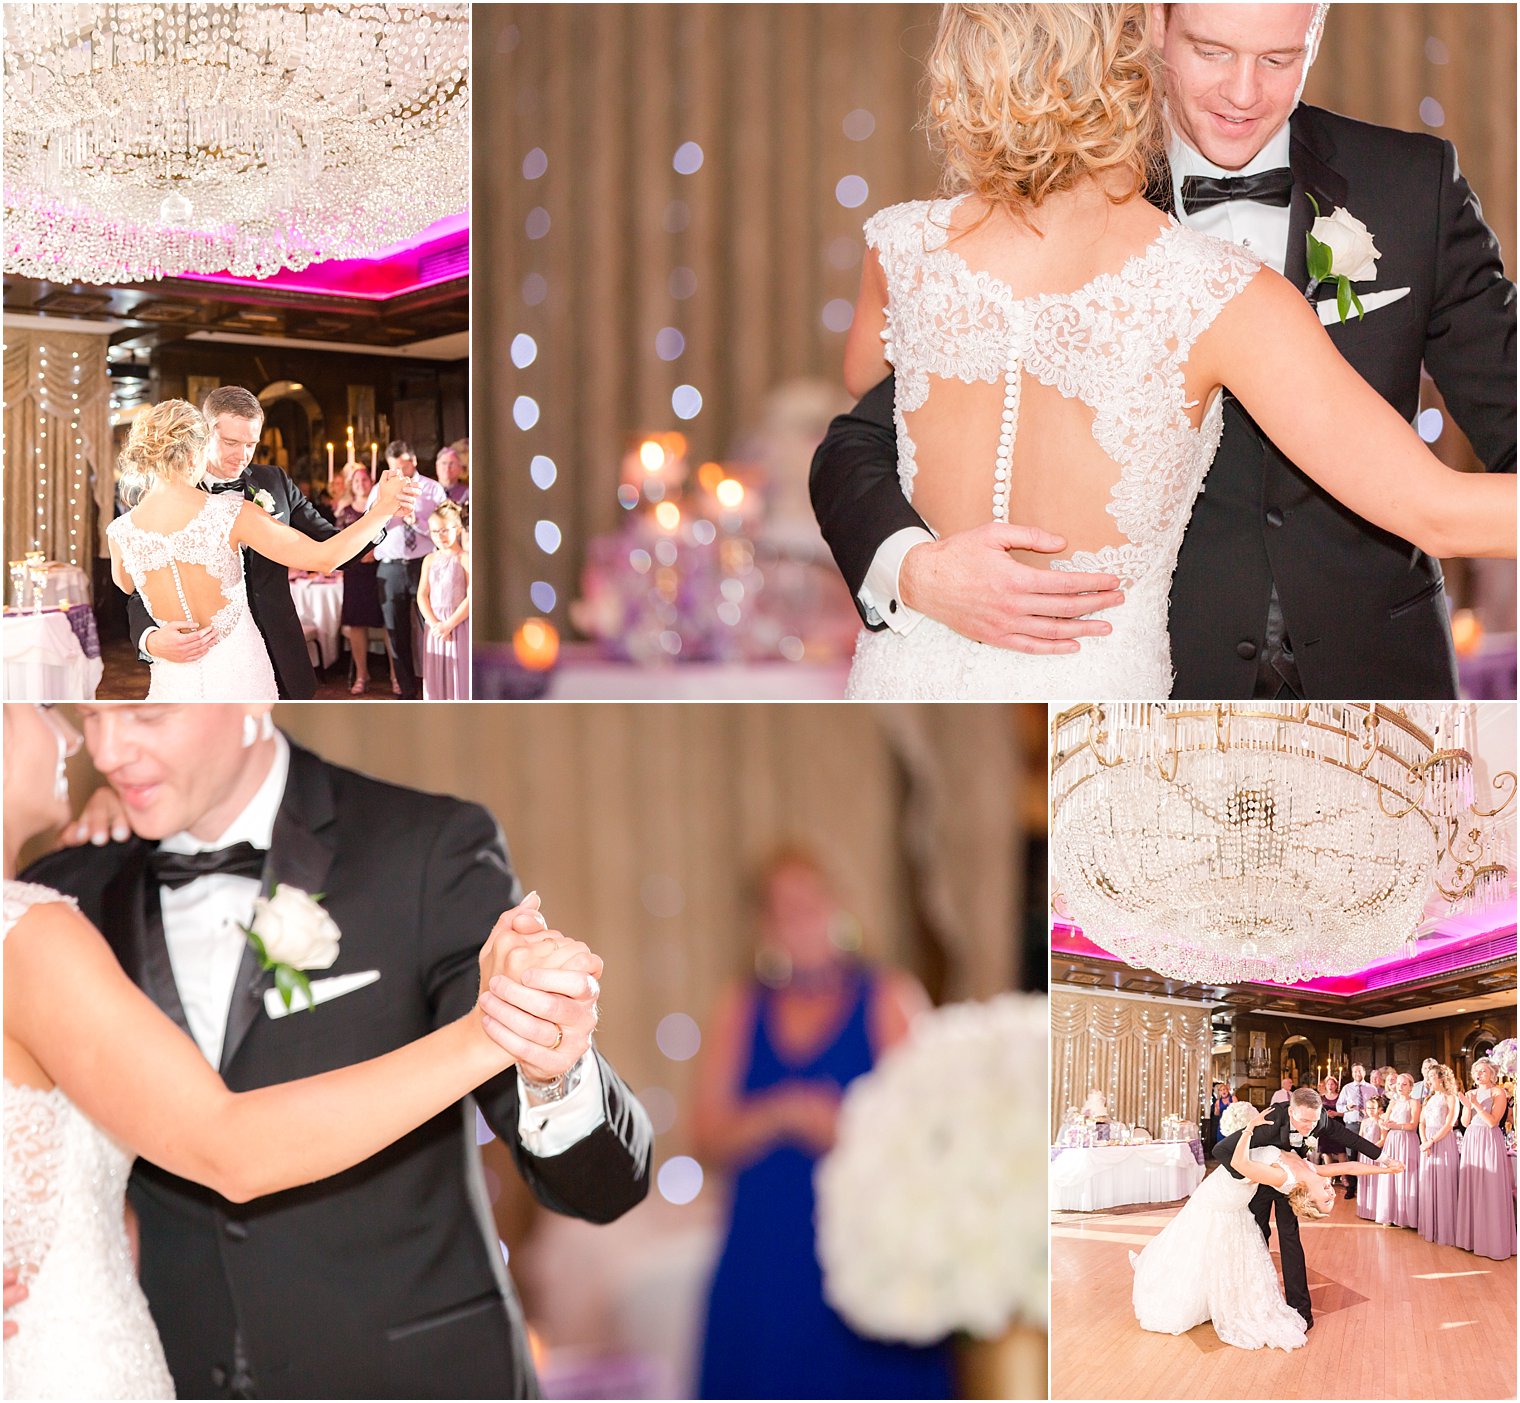 First dance photos at The Manor in West Orange, NJ